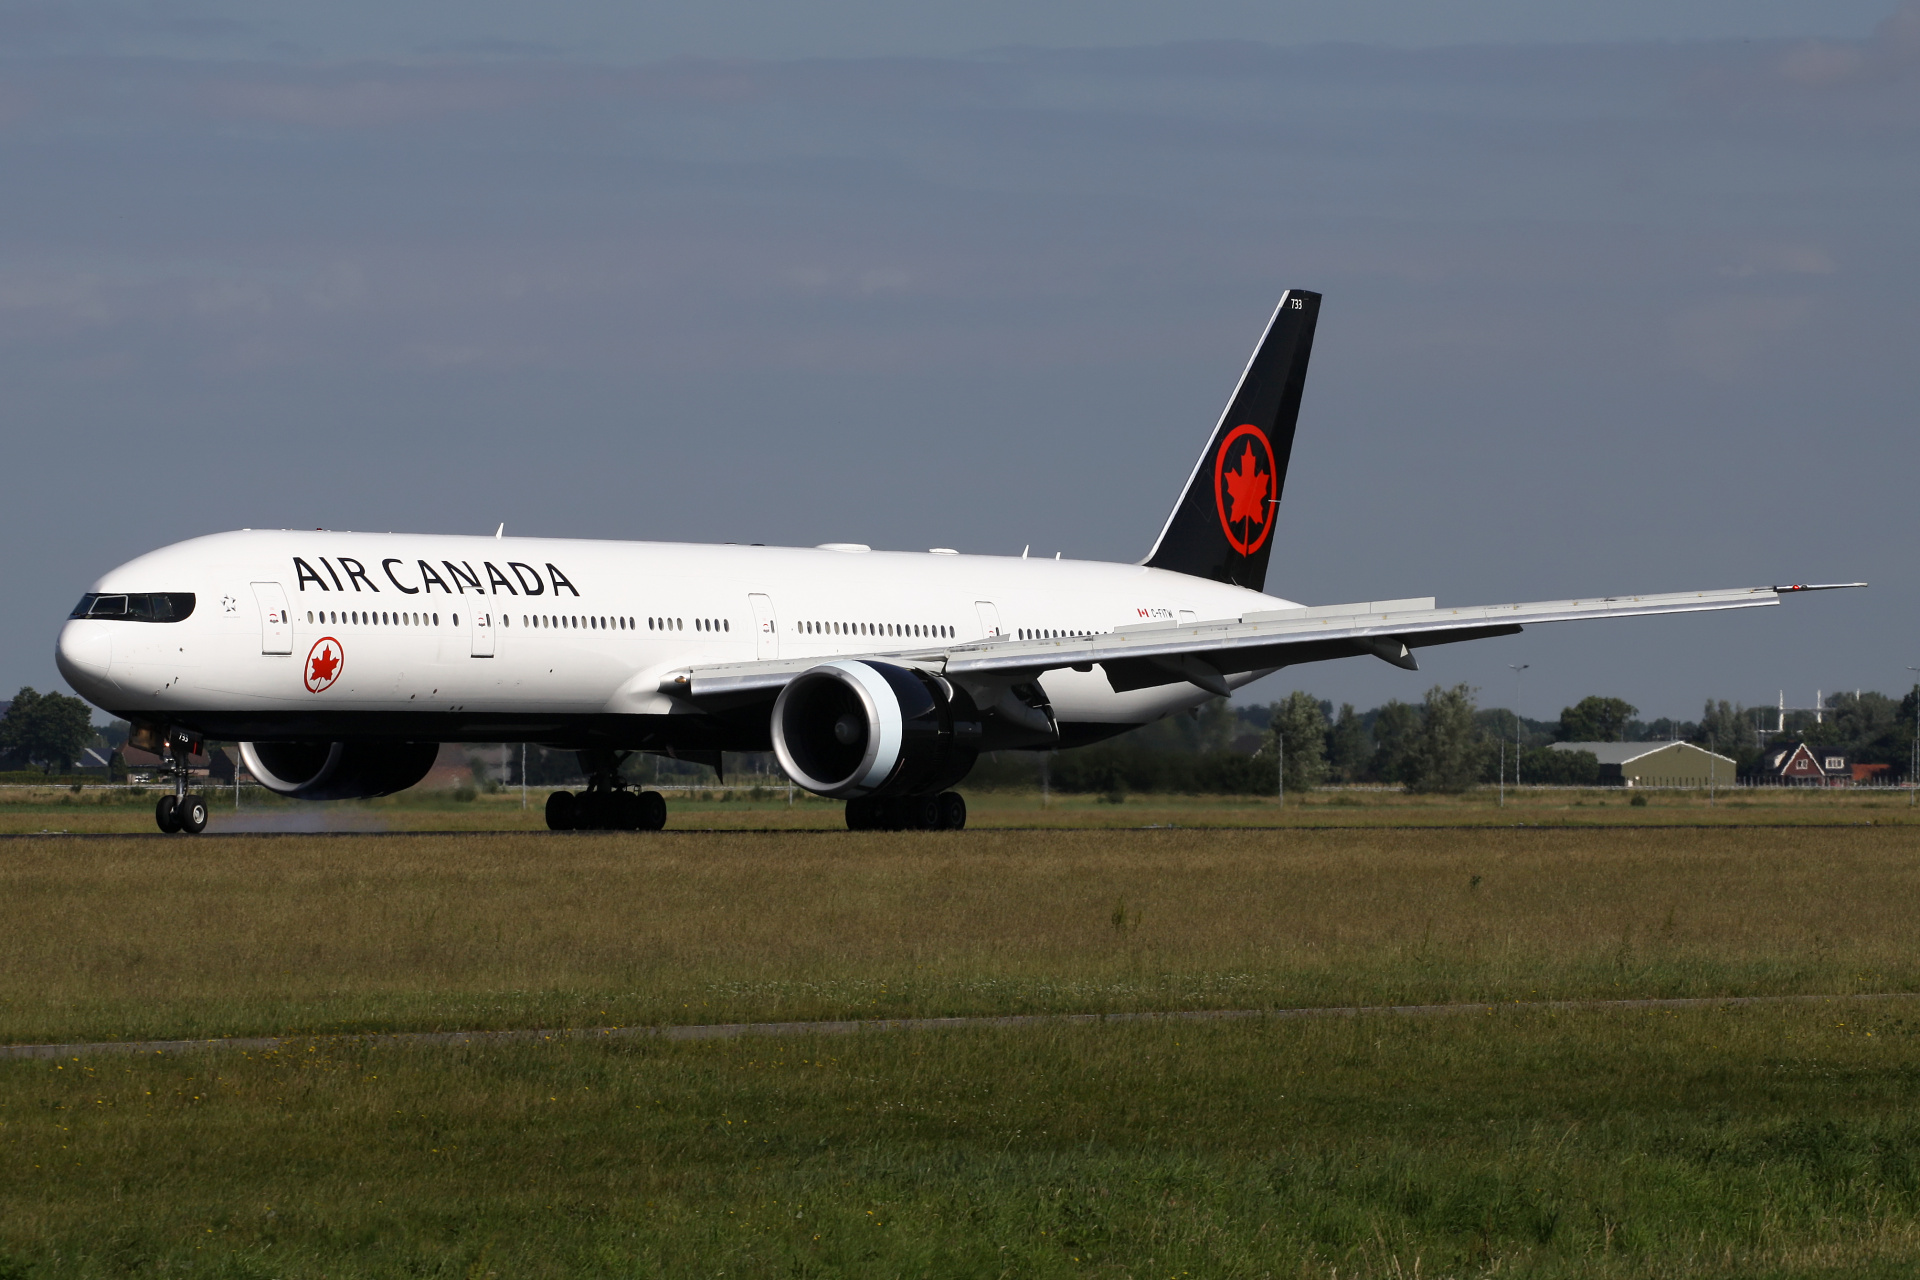 C-FITW, Air Canada (Aircraft » Schiphol Spotting » Boeing 777-300ER)